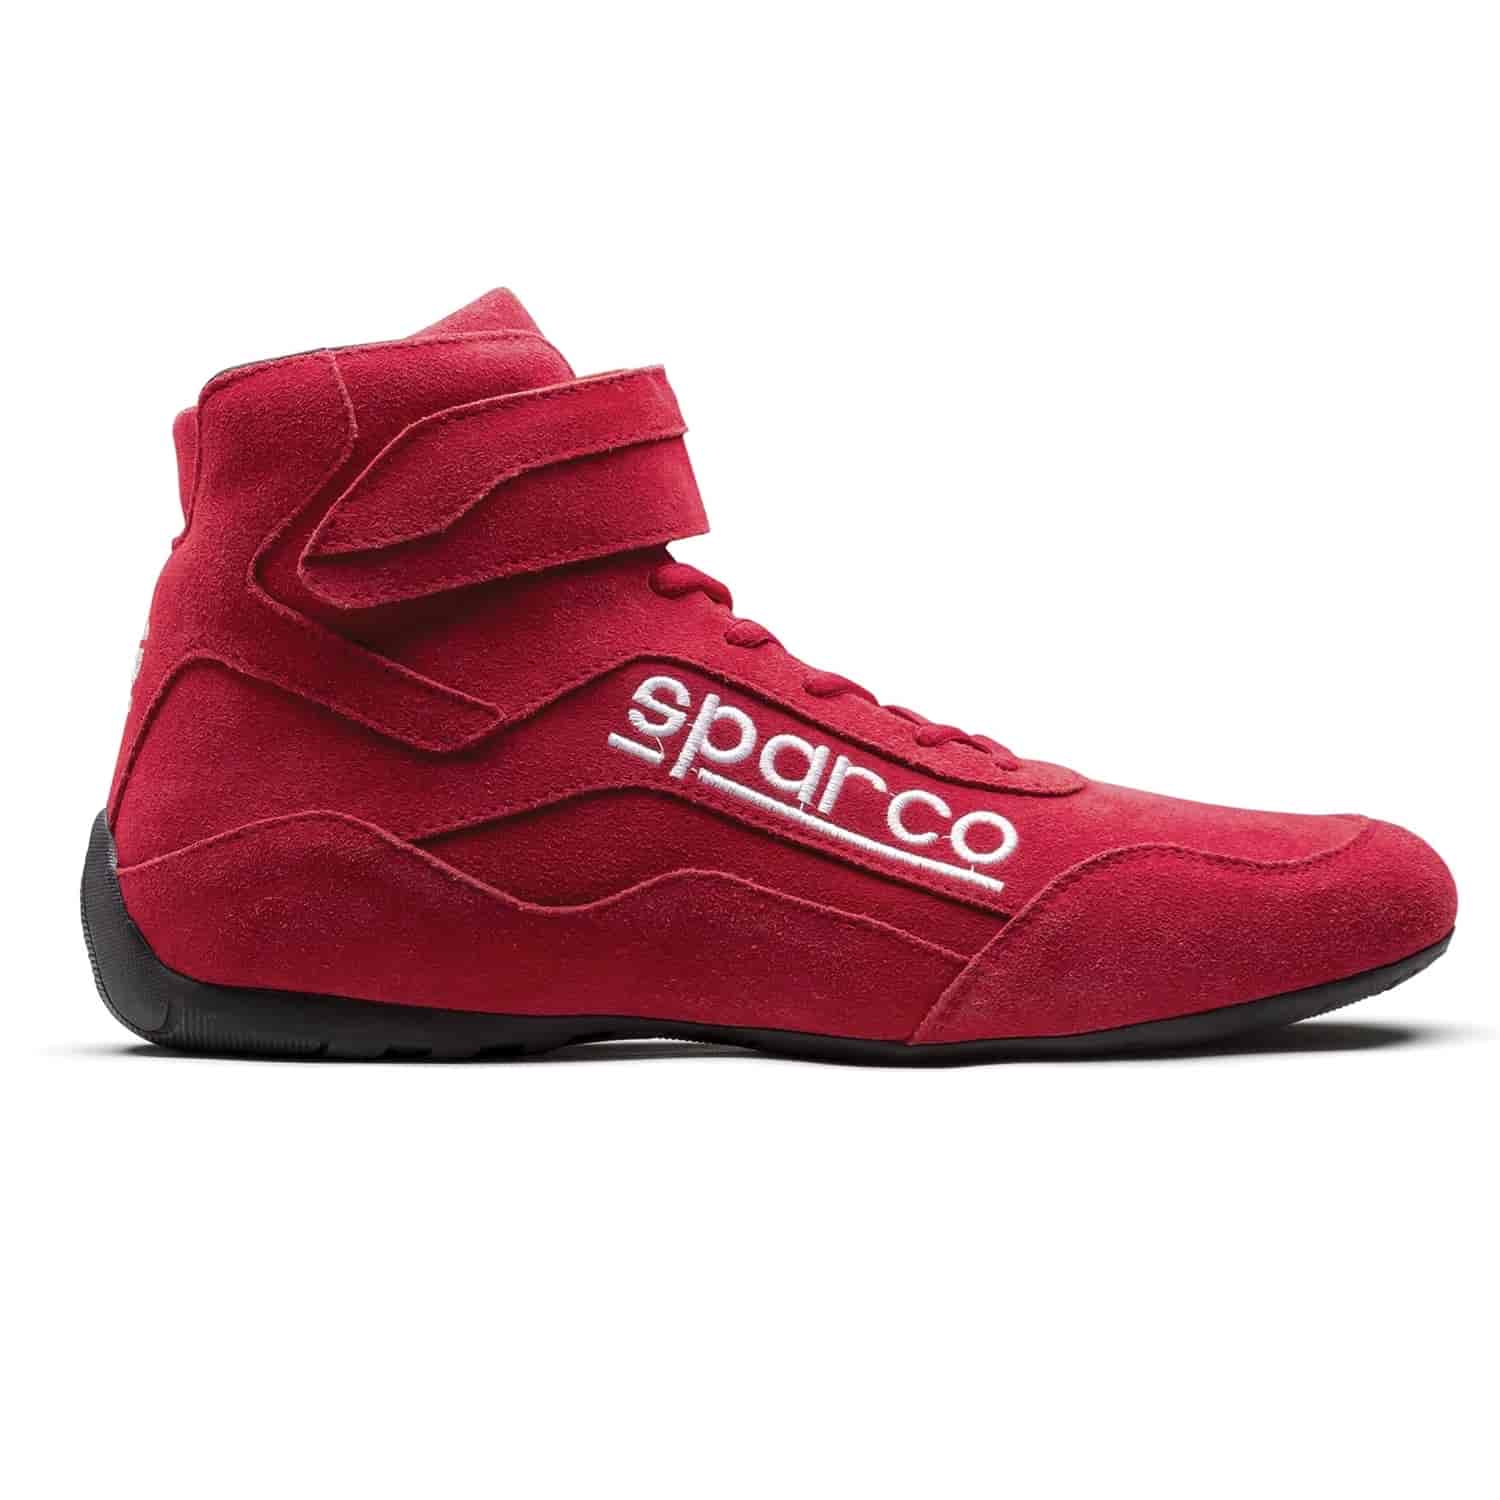 Race 2 Shoe Size 13 - Red